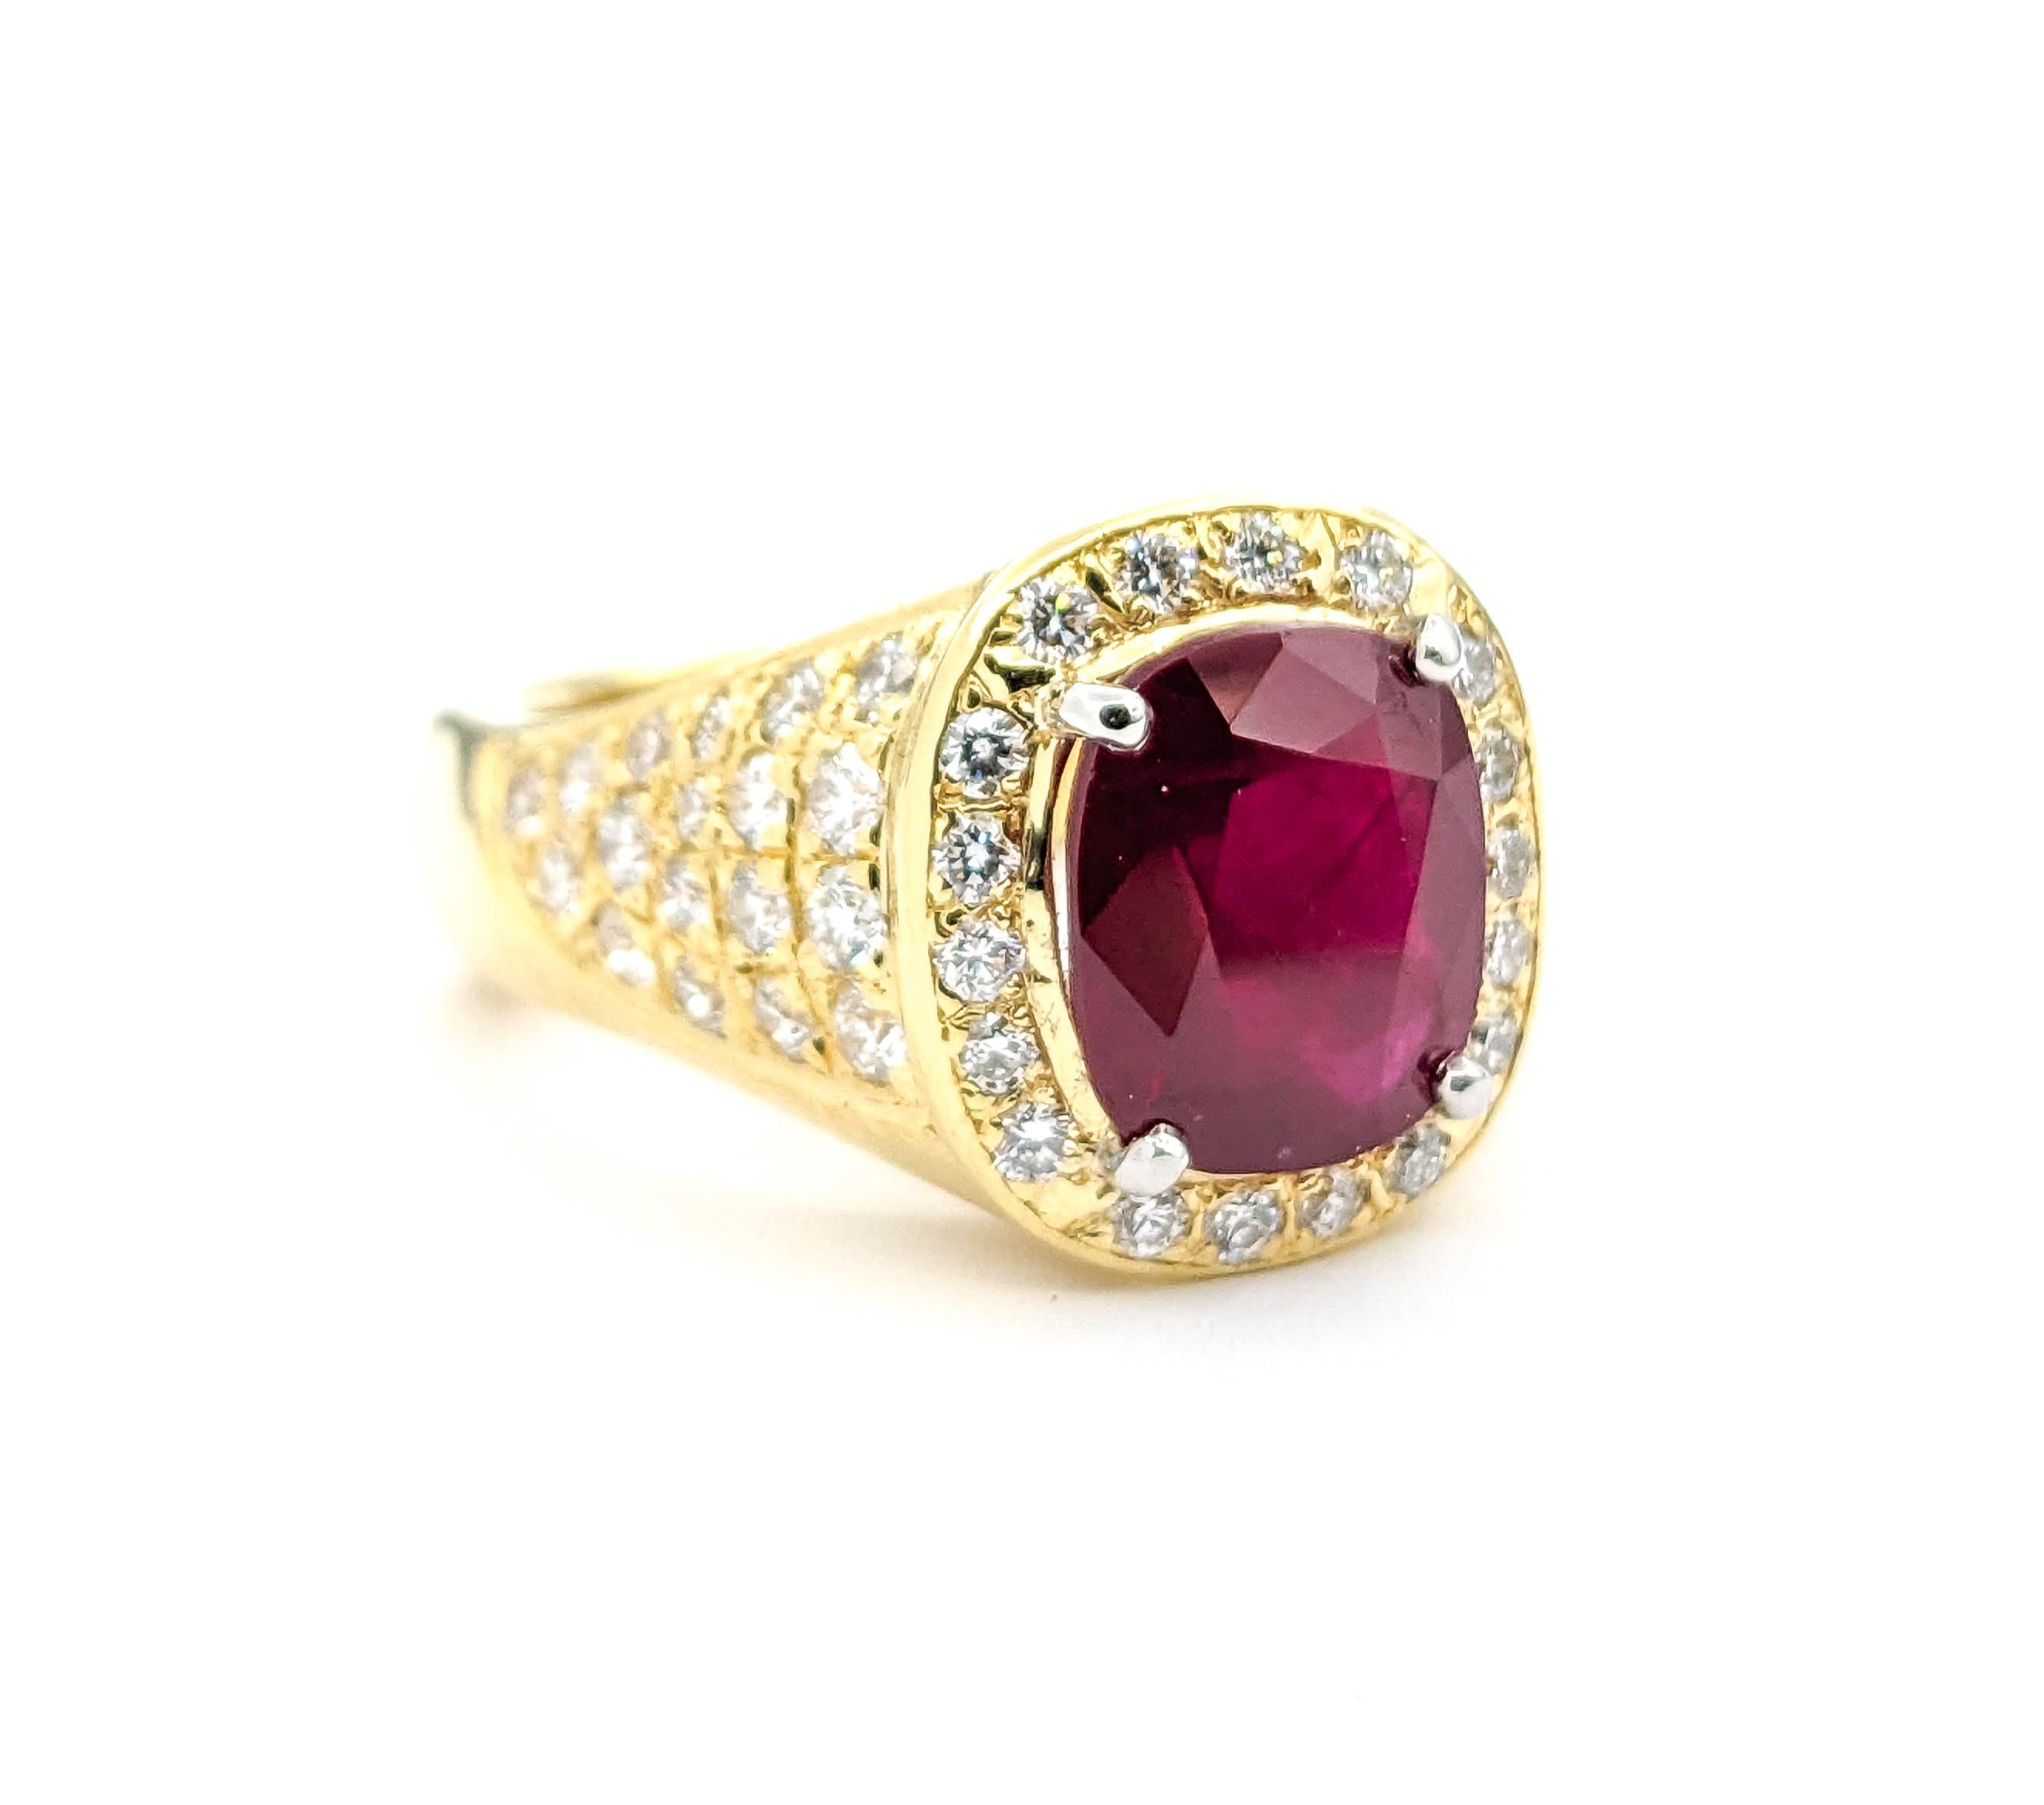 GIA Cerified 5.87ct Heat-only Burmese Ruby & 1.50ctw Diamonds Ring In Yellow Gol For Sale 1